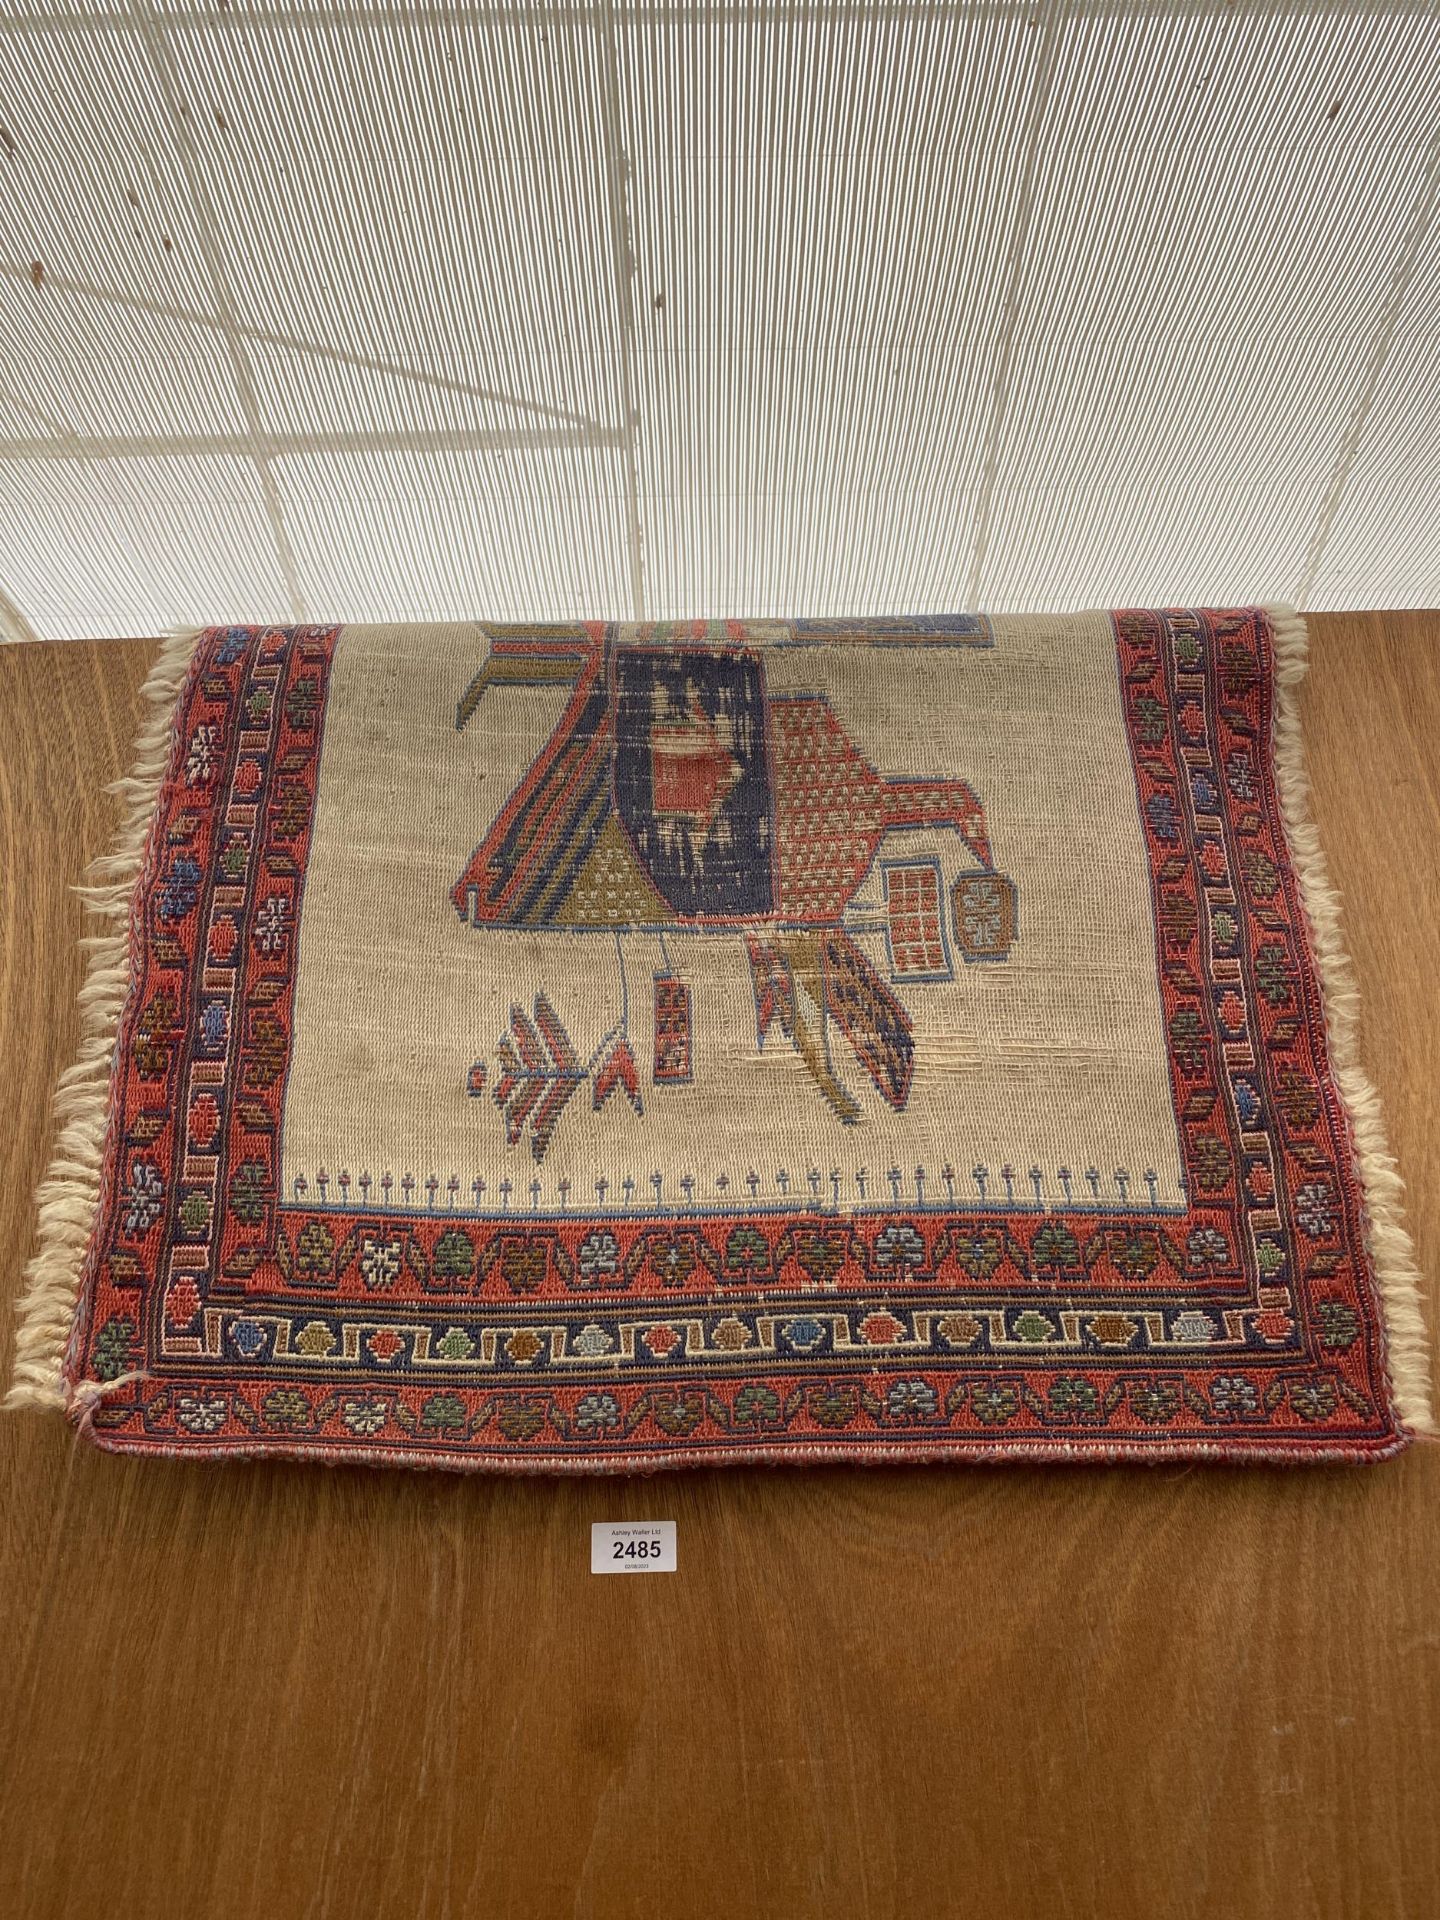 A SMALL RED PATTERNED FRINGED RUG